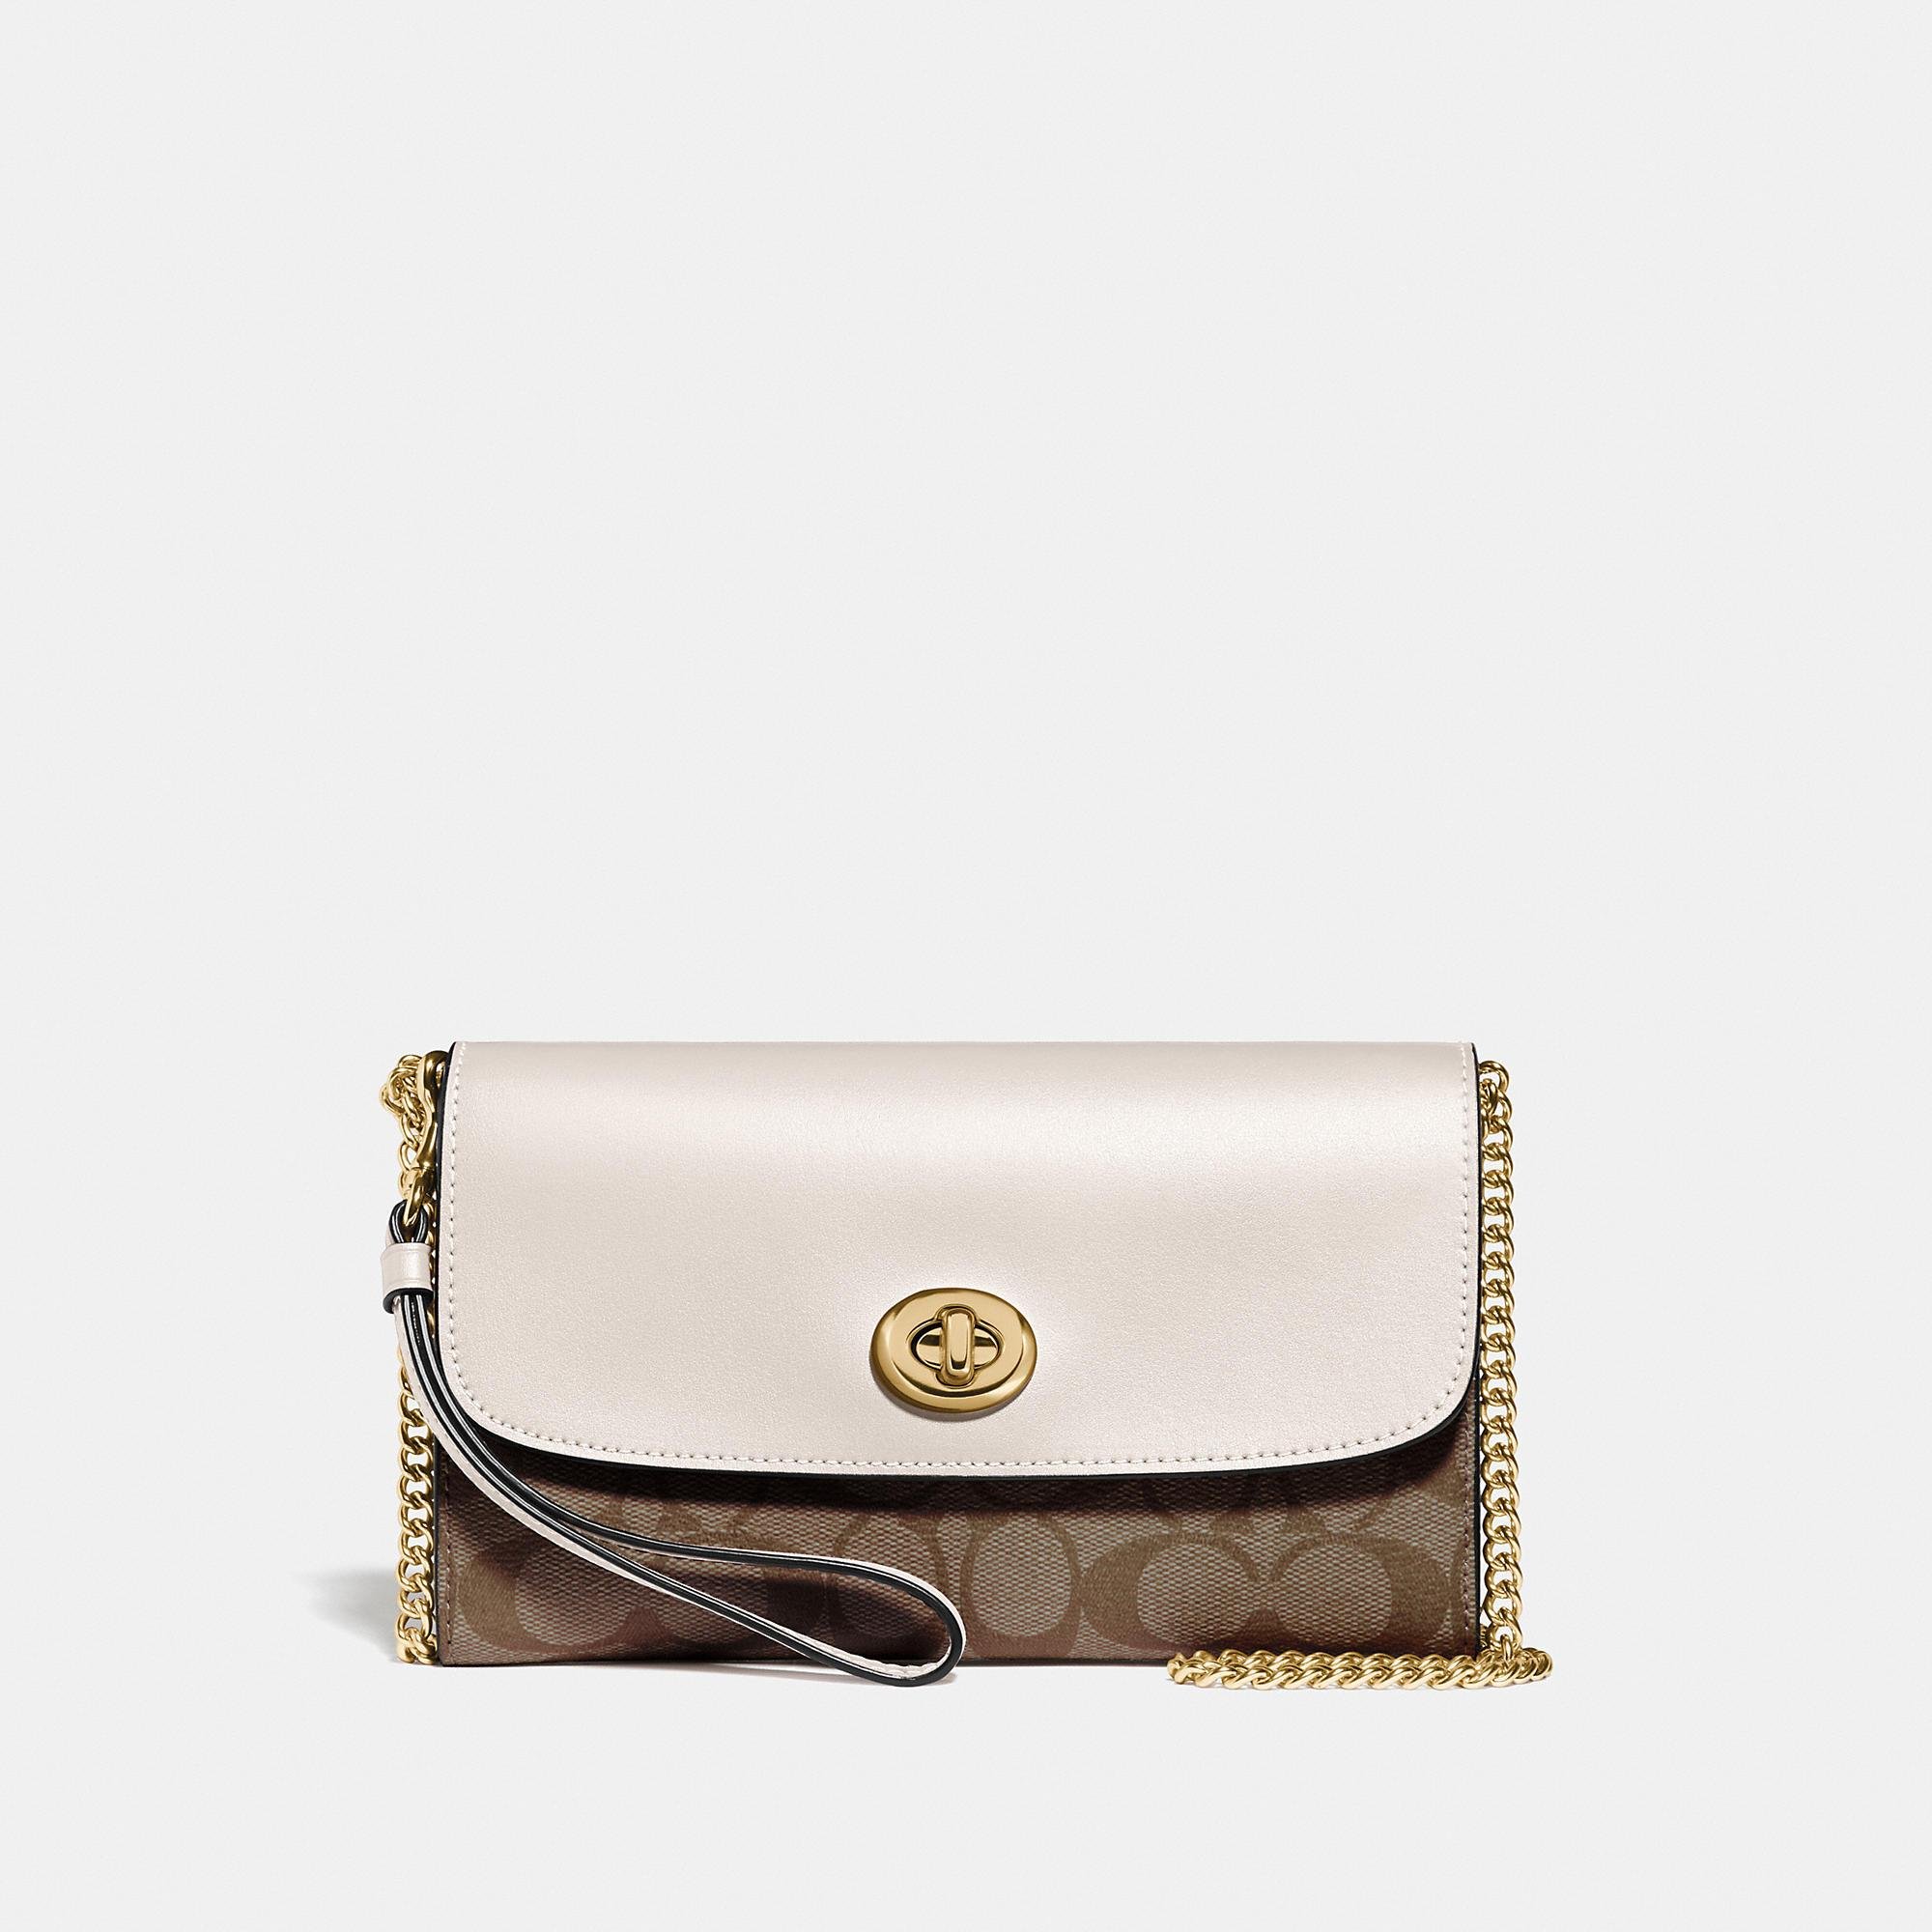 COACH Chain Crossbody Bag In Signature Canvas in Natural | Lyst